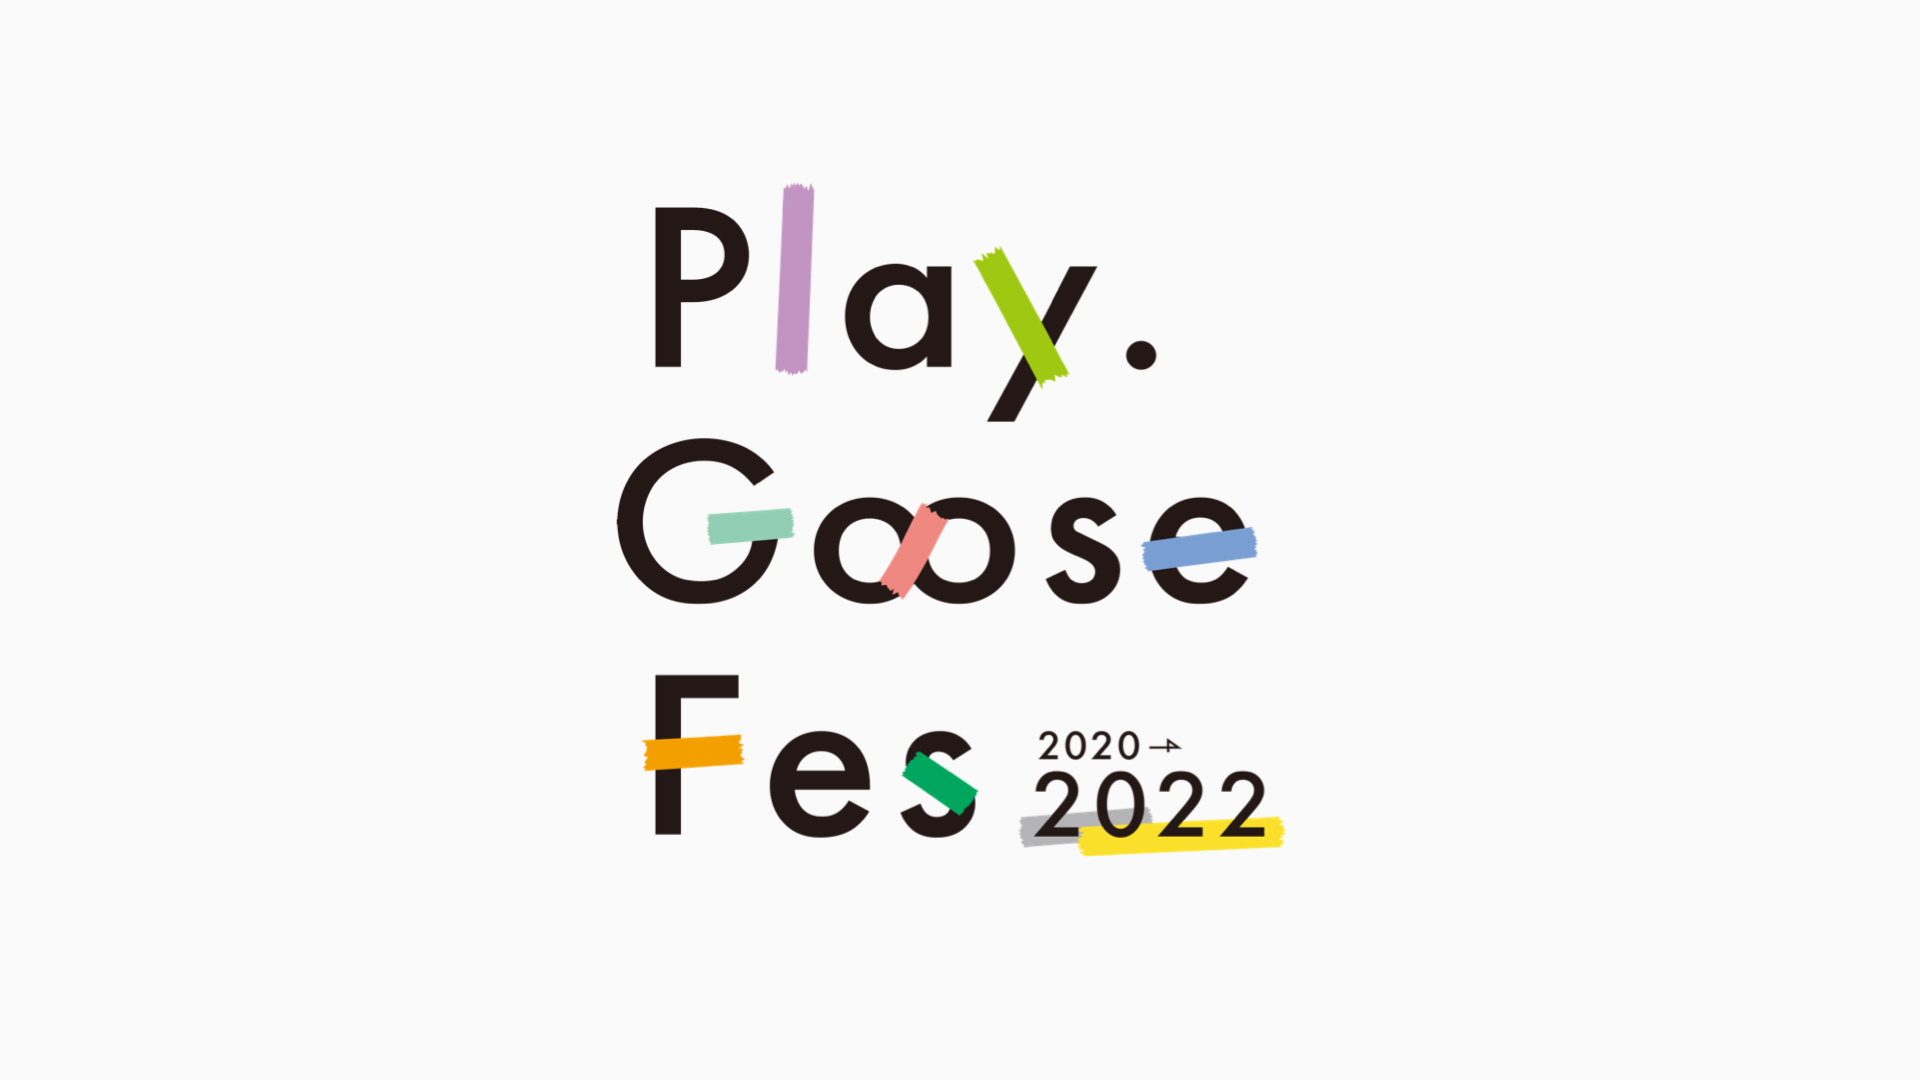 「Play.Goose Fes 2020→2022」Archive